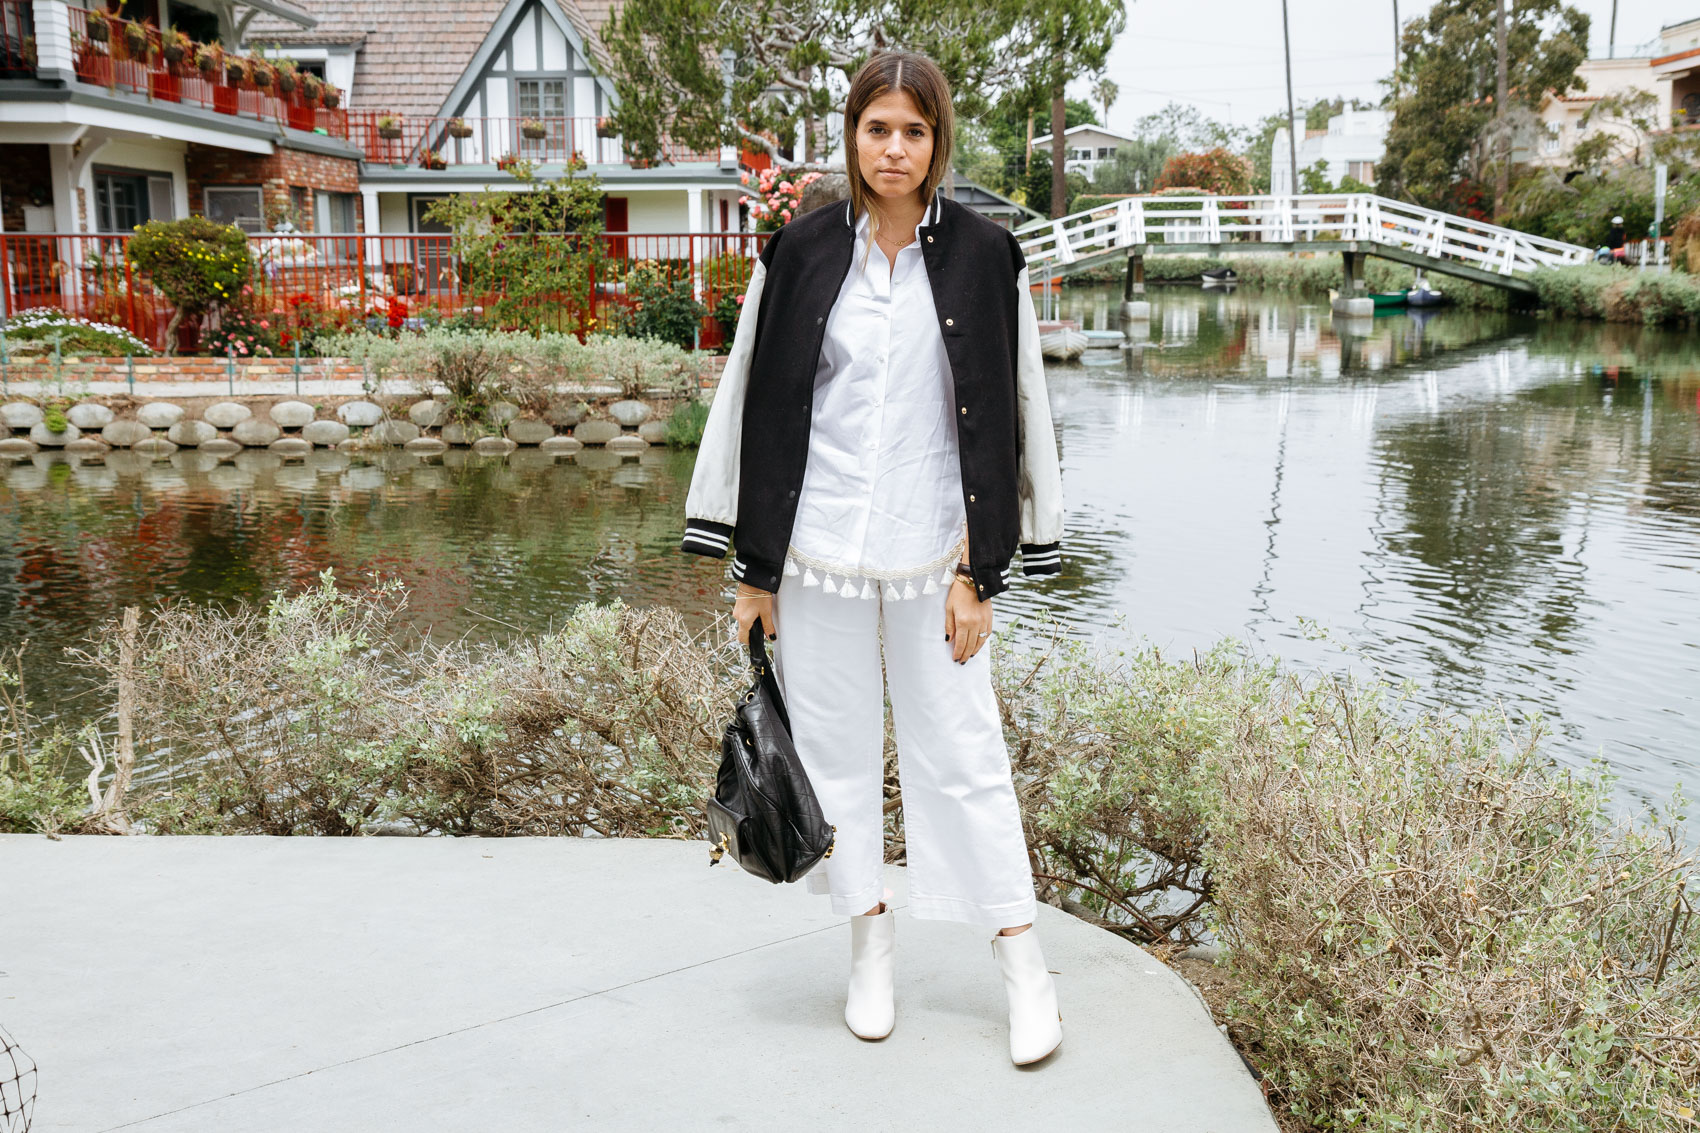 Blogger Maristella at the Venice Canals wearing a varsity jacket from Pull & Bear, shirt from Uterqüe, jeans from Zara, boots from Uterqüe, vintage Chanel bag